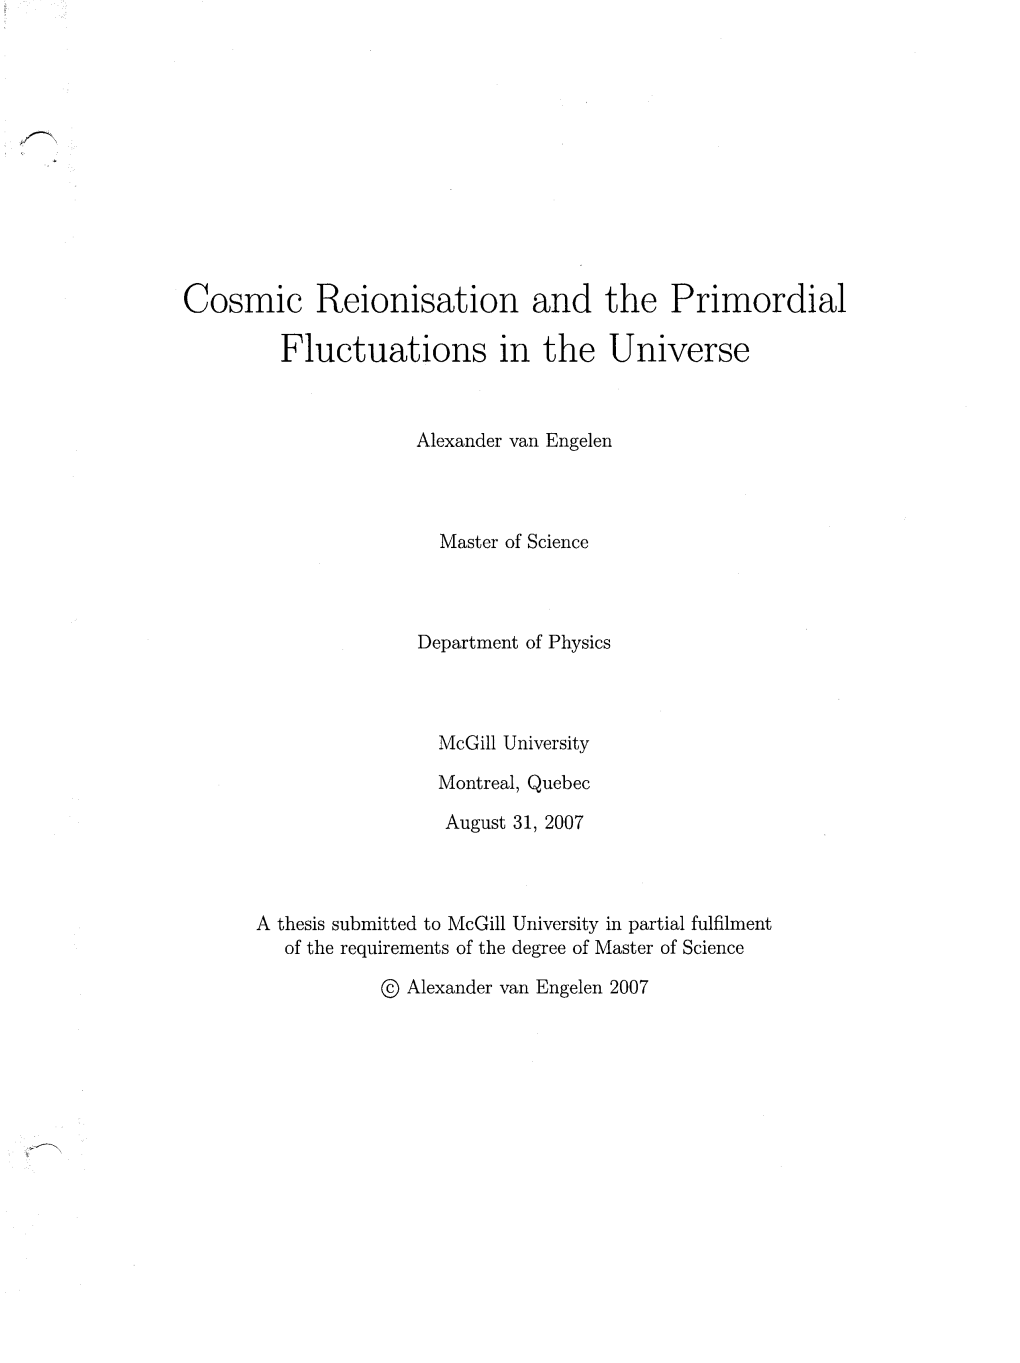 Cosmic Reionisation and the Primordial Fluctuations in the Universe